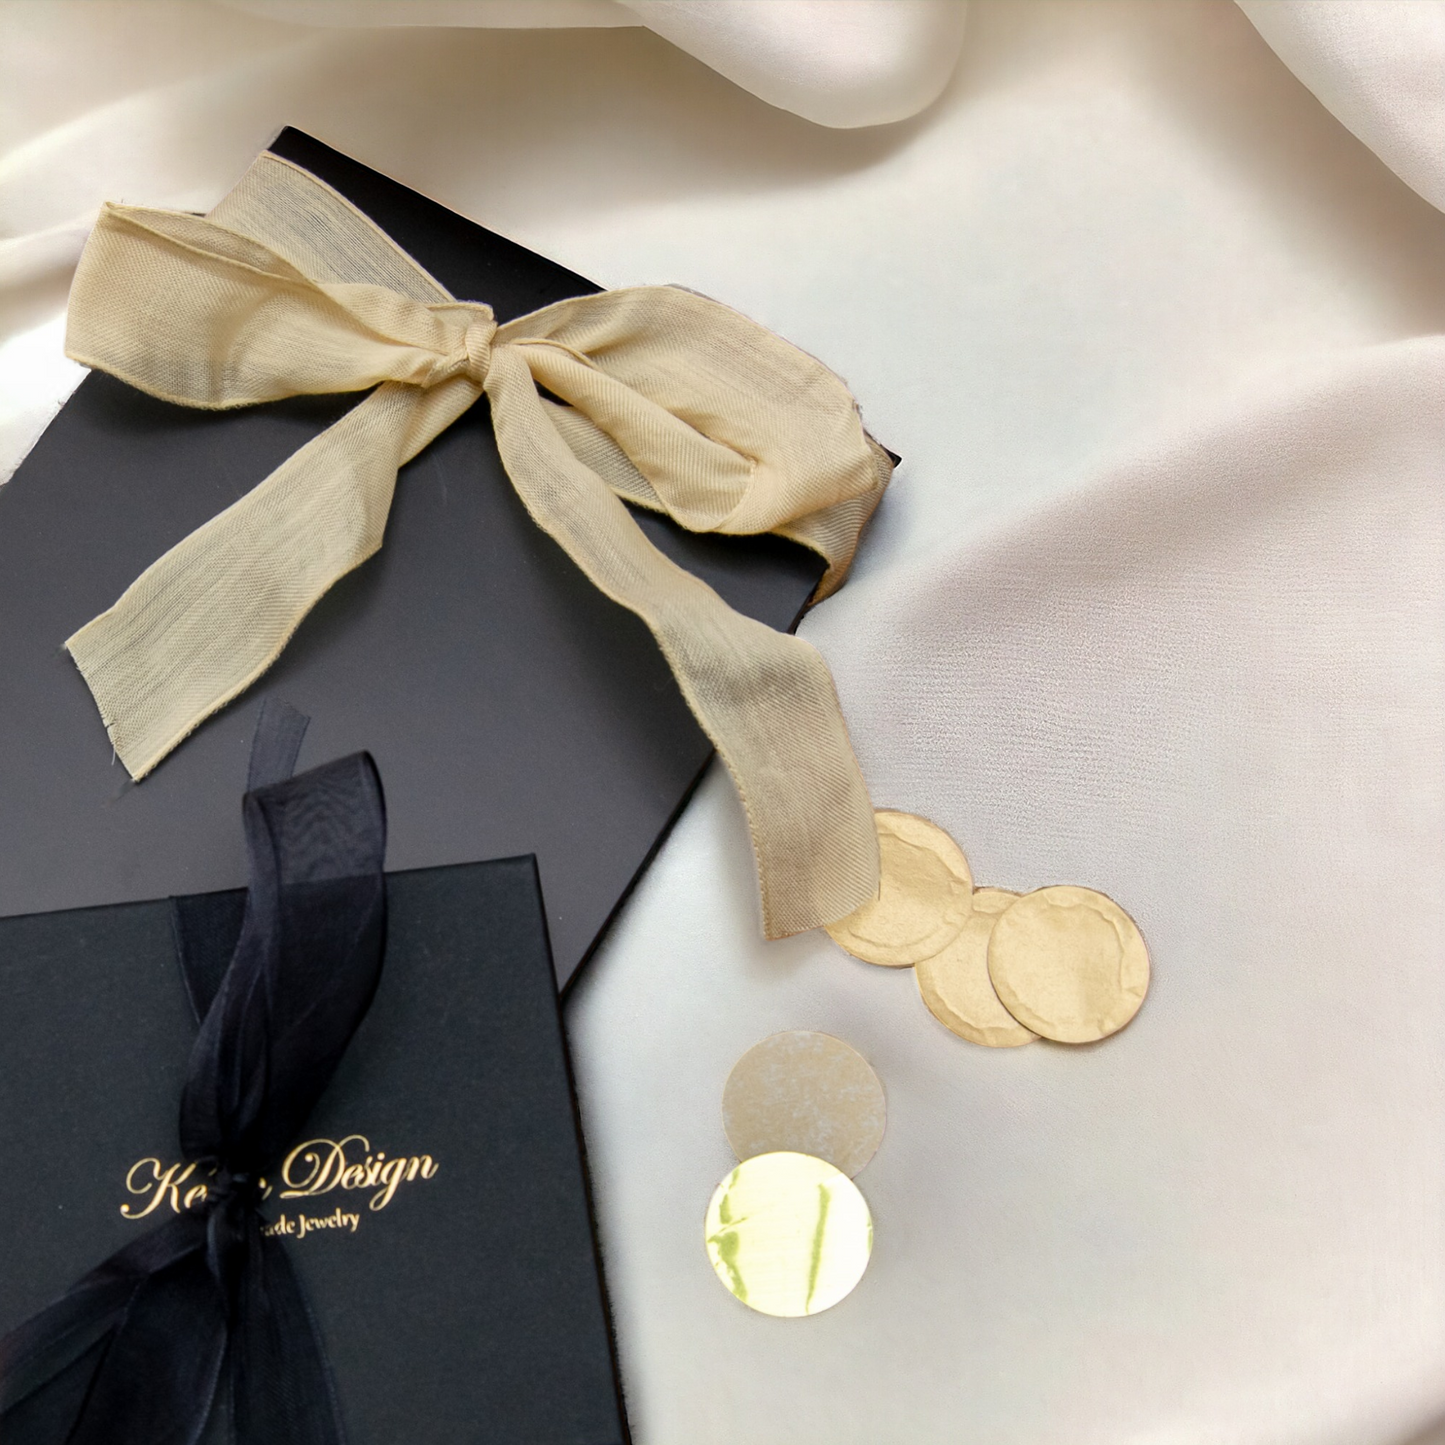 Black & Gold giftwrapping